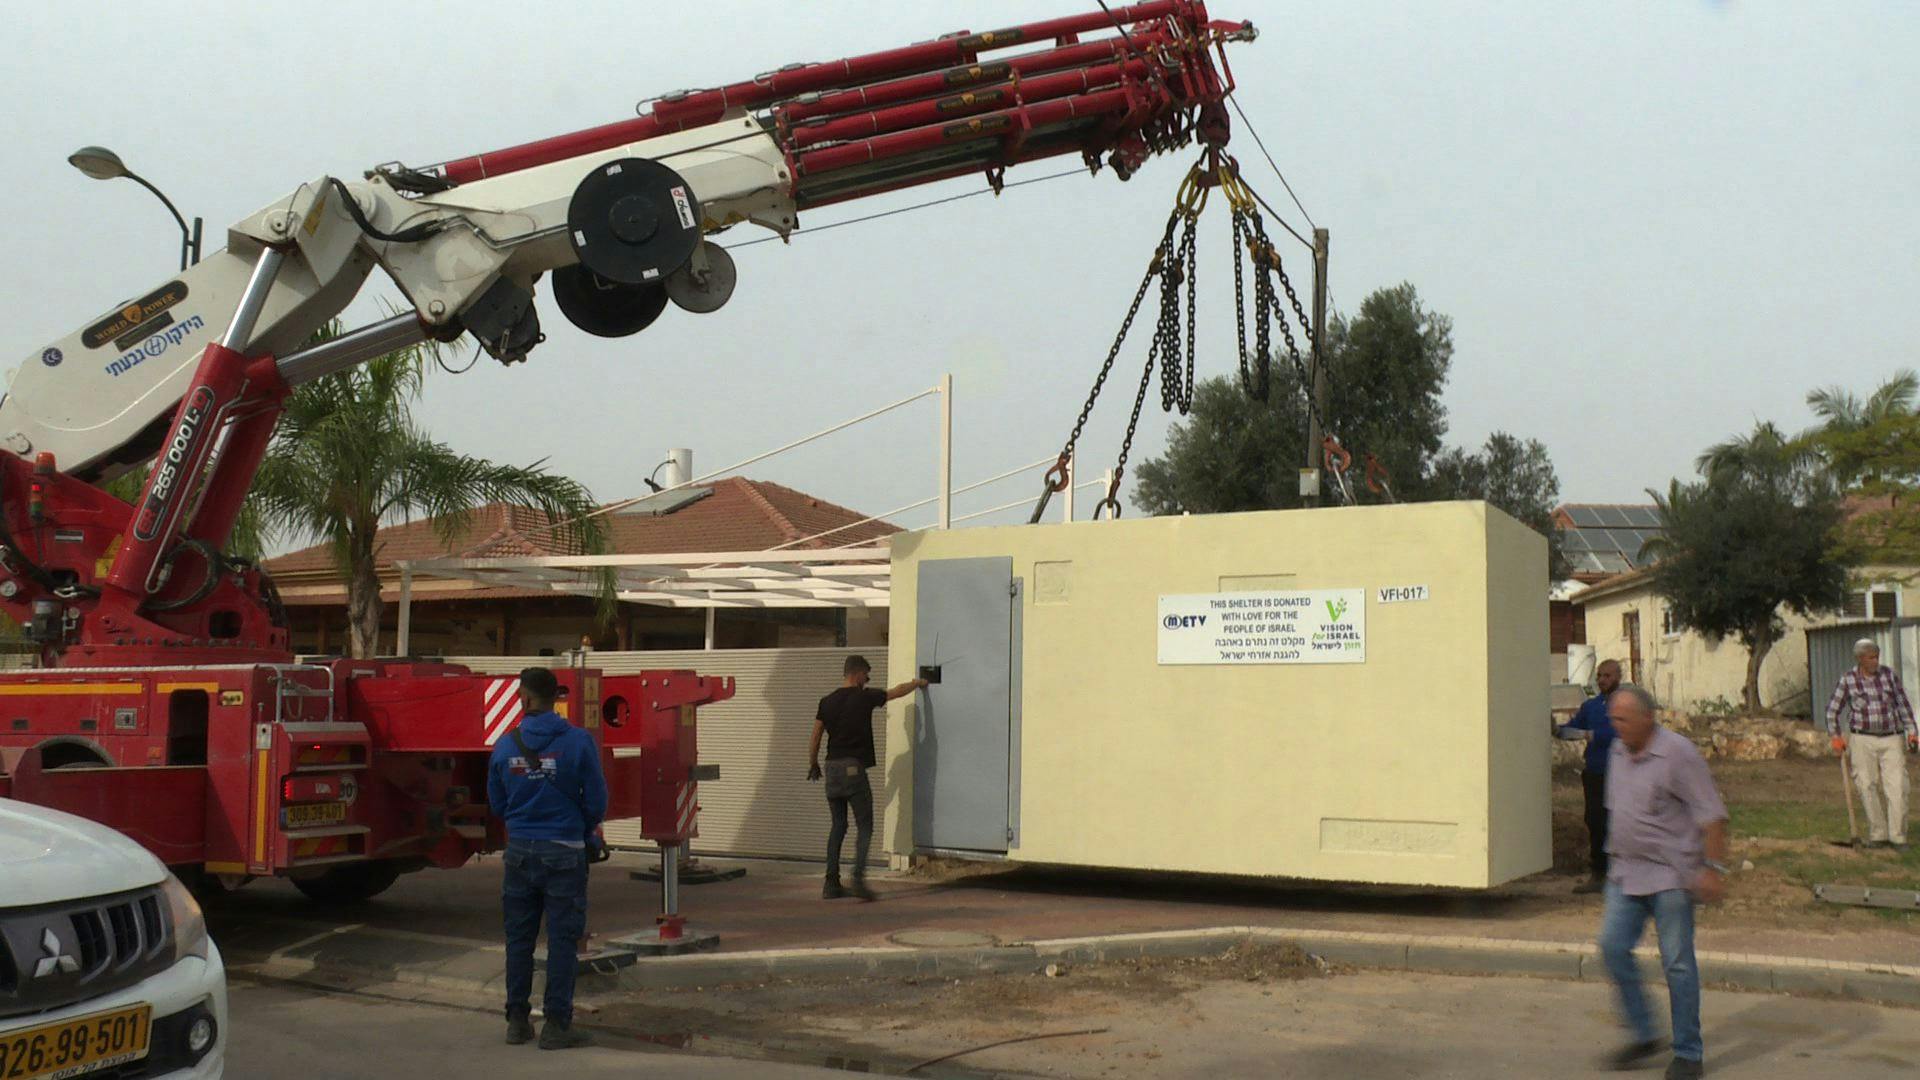 Mobile shelter being stationed in southern Israel